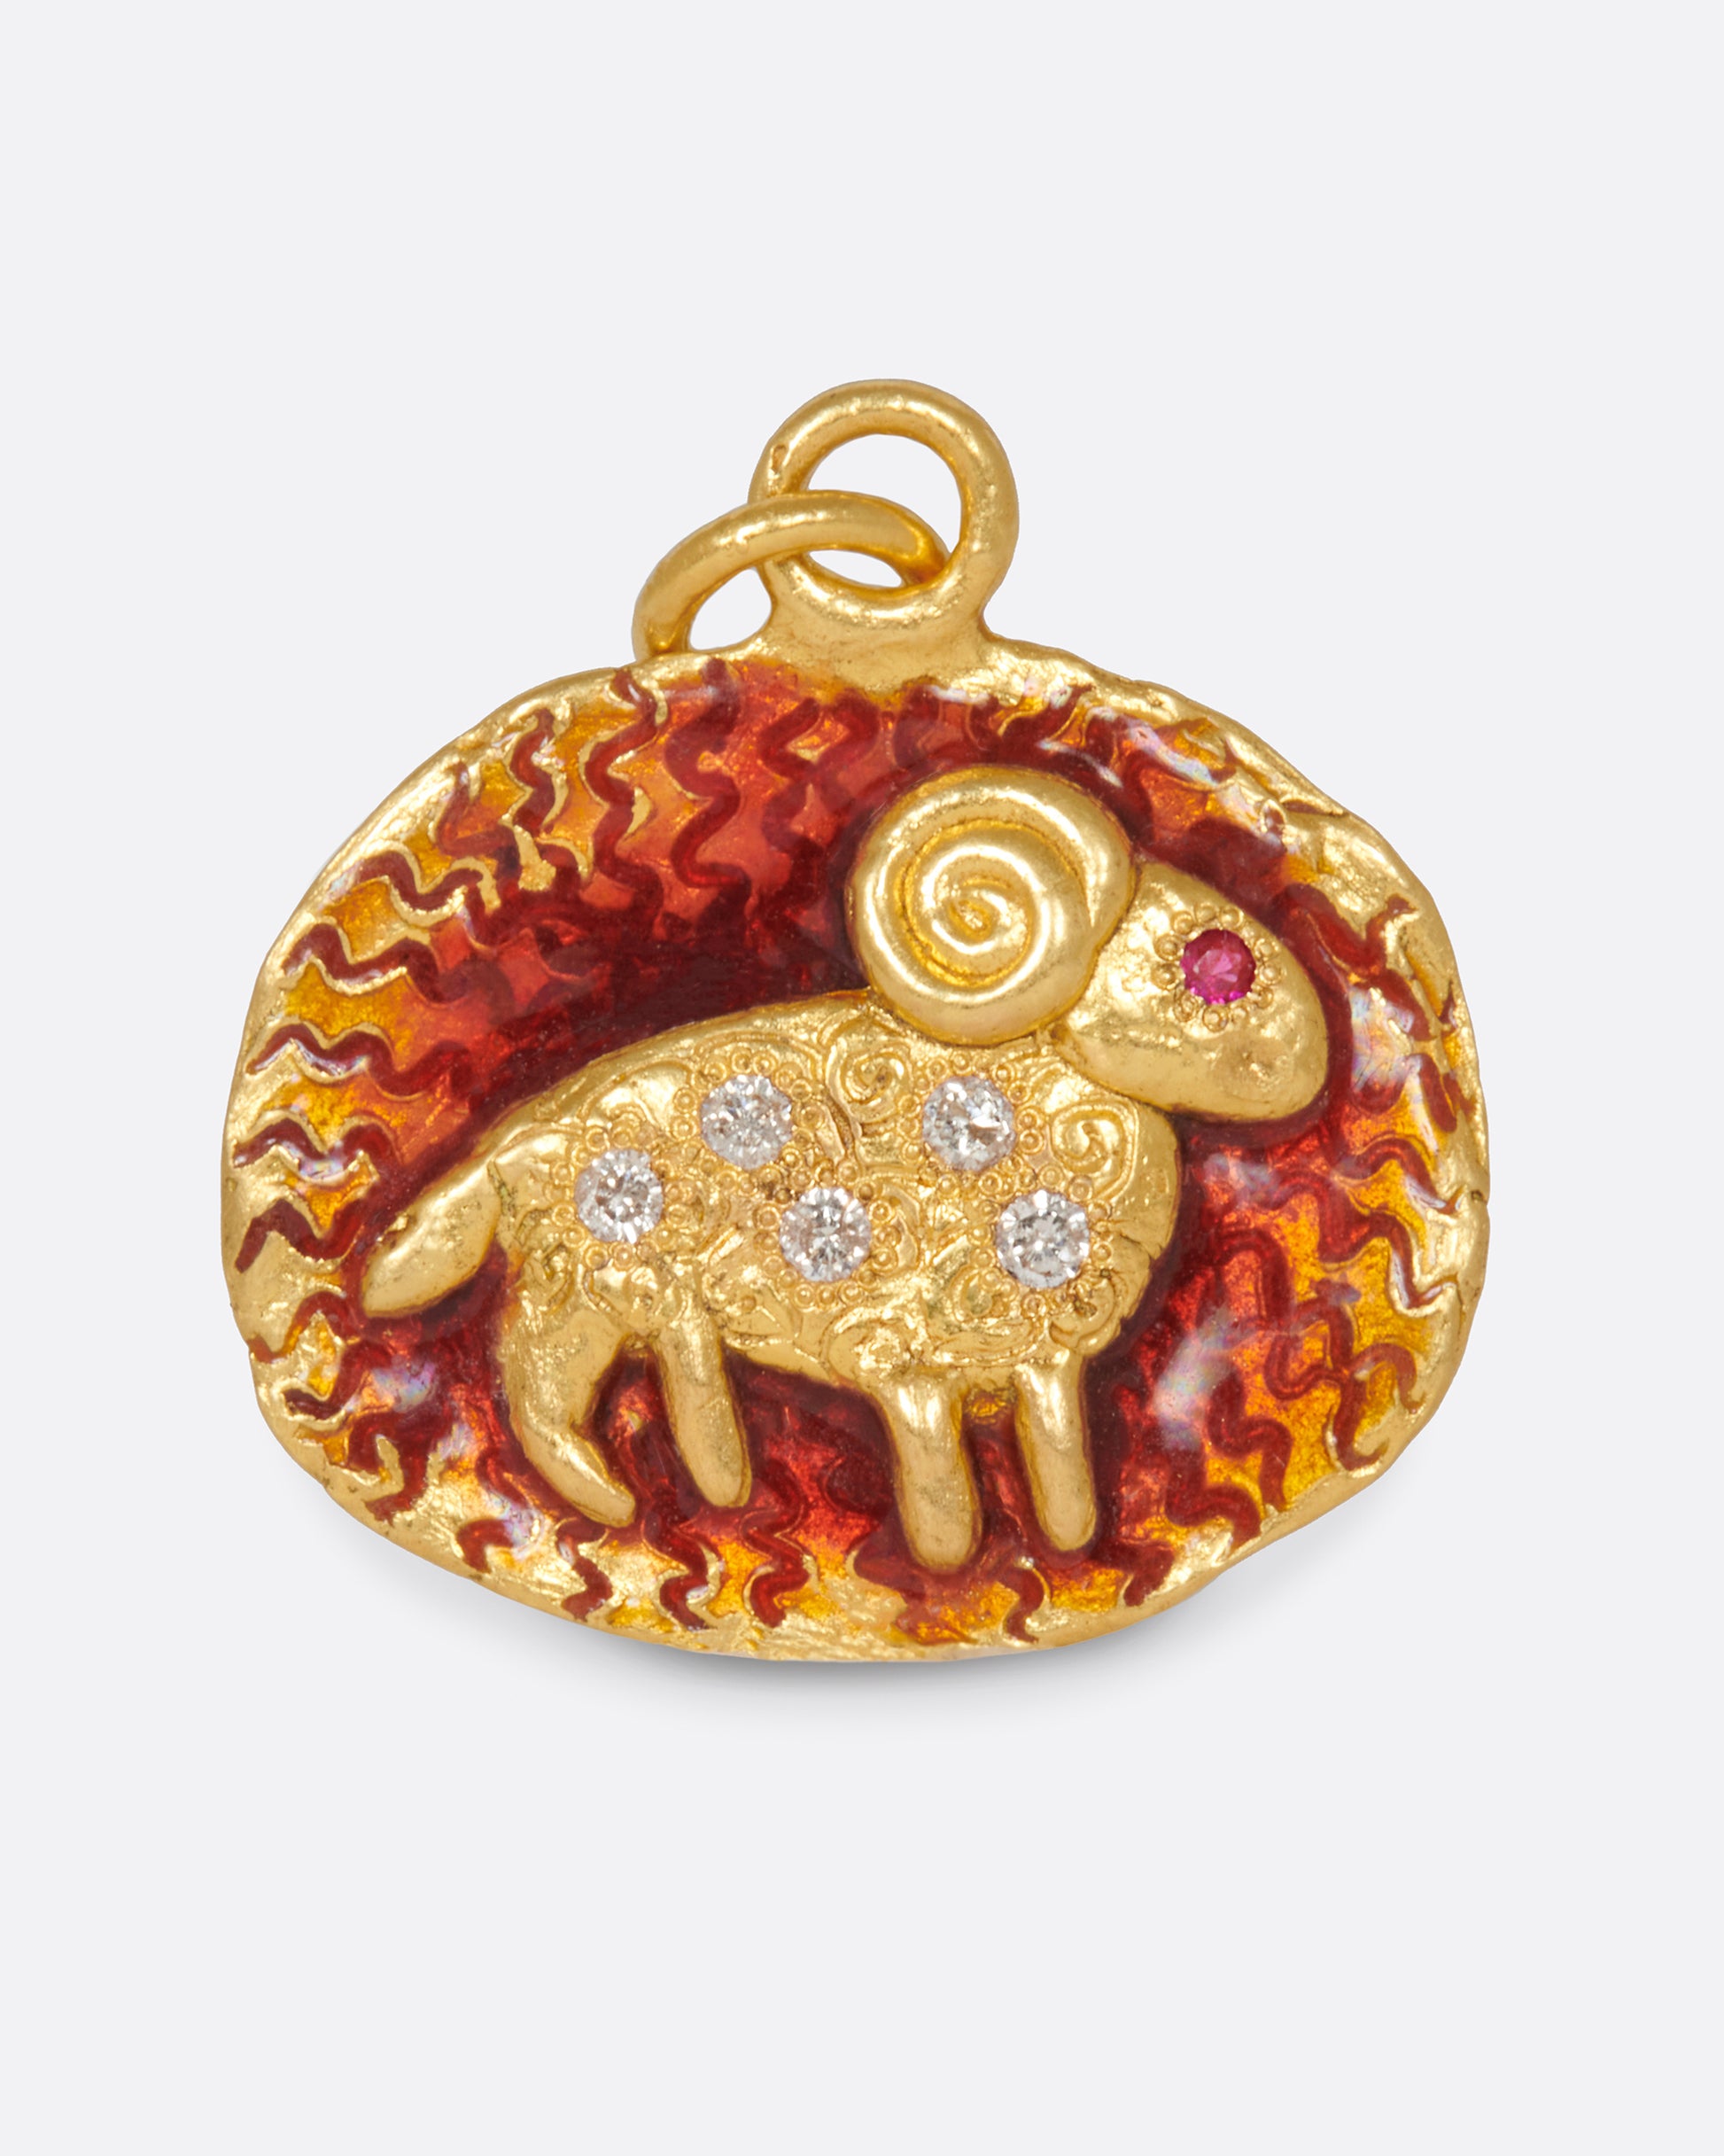 An oval pendant with an Aries symbol accented by squiggly etchings, diamonds and a ruby.